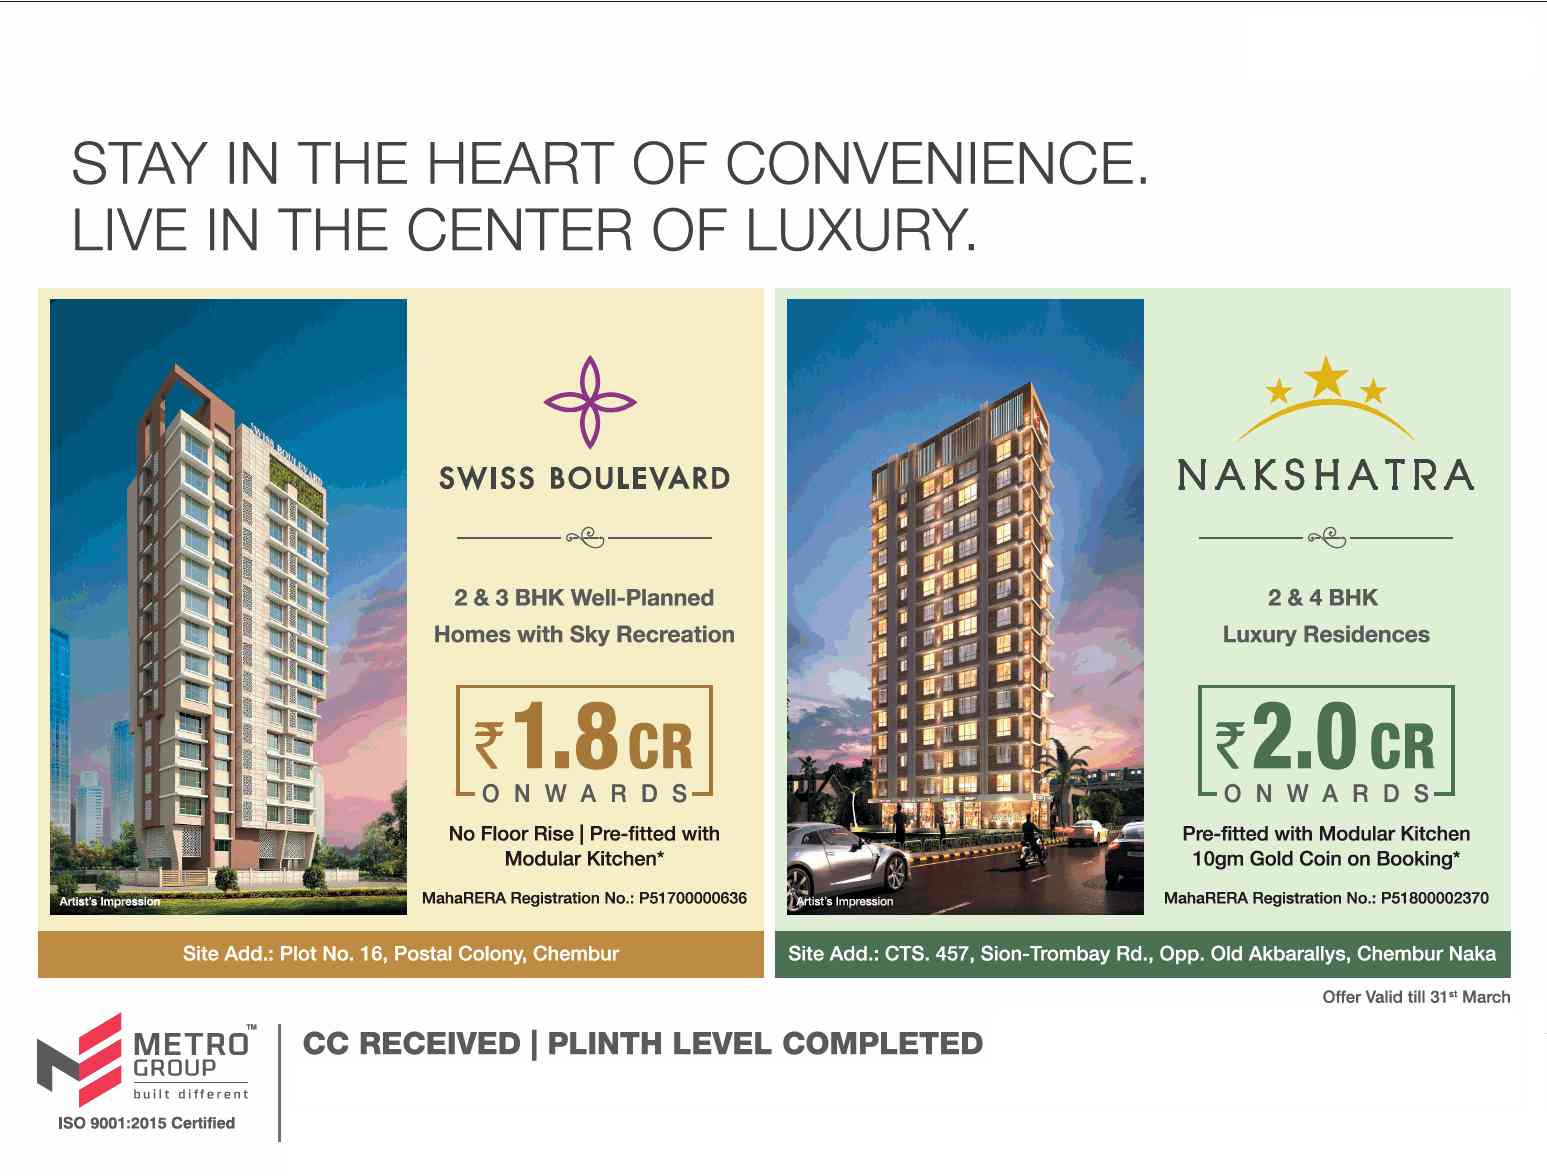 Invest in Metro Group properties & live in the center of luxury in Navi Mumbai